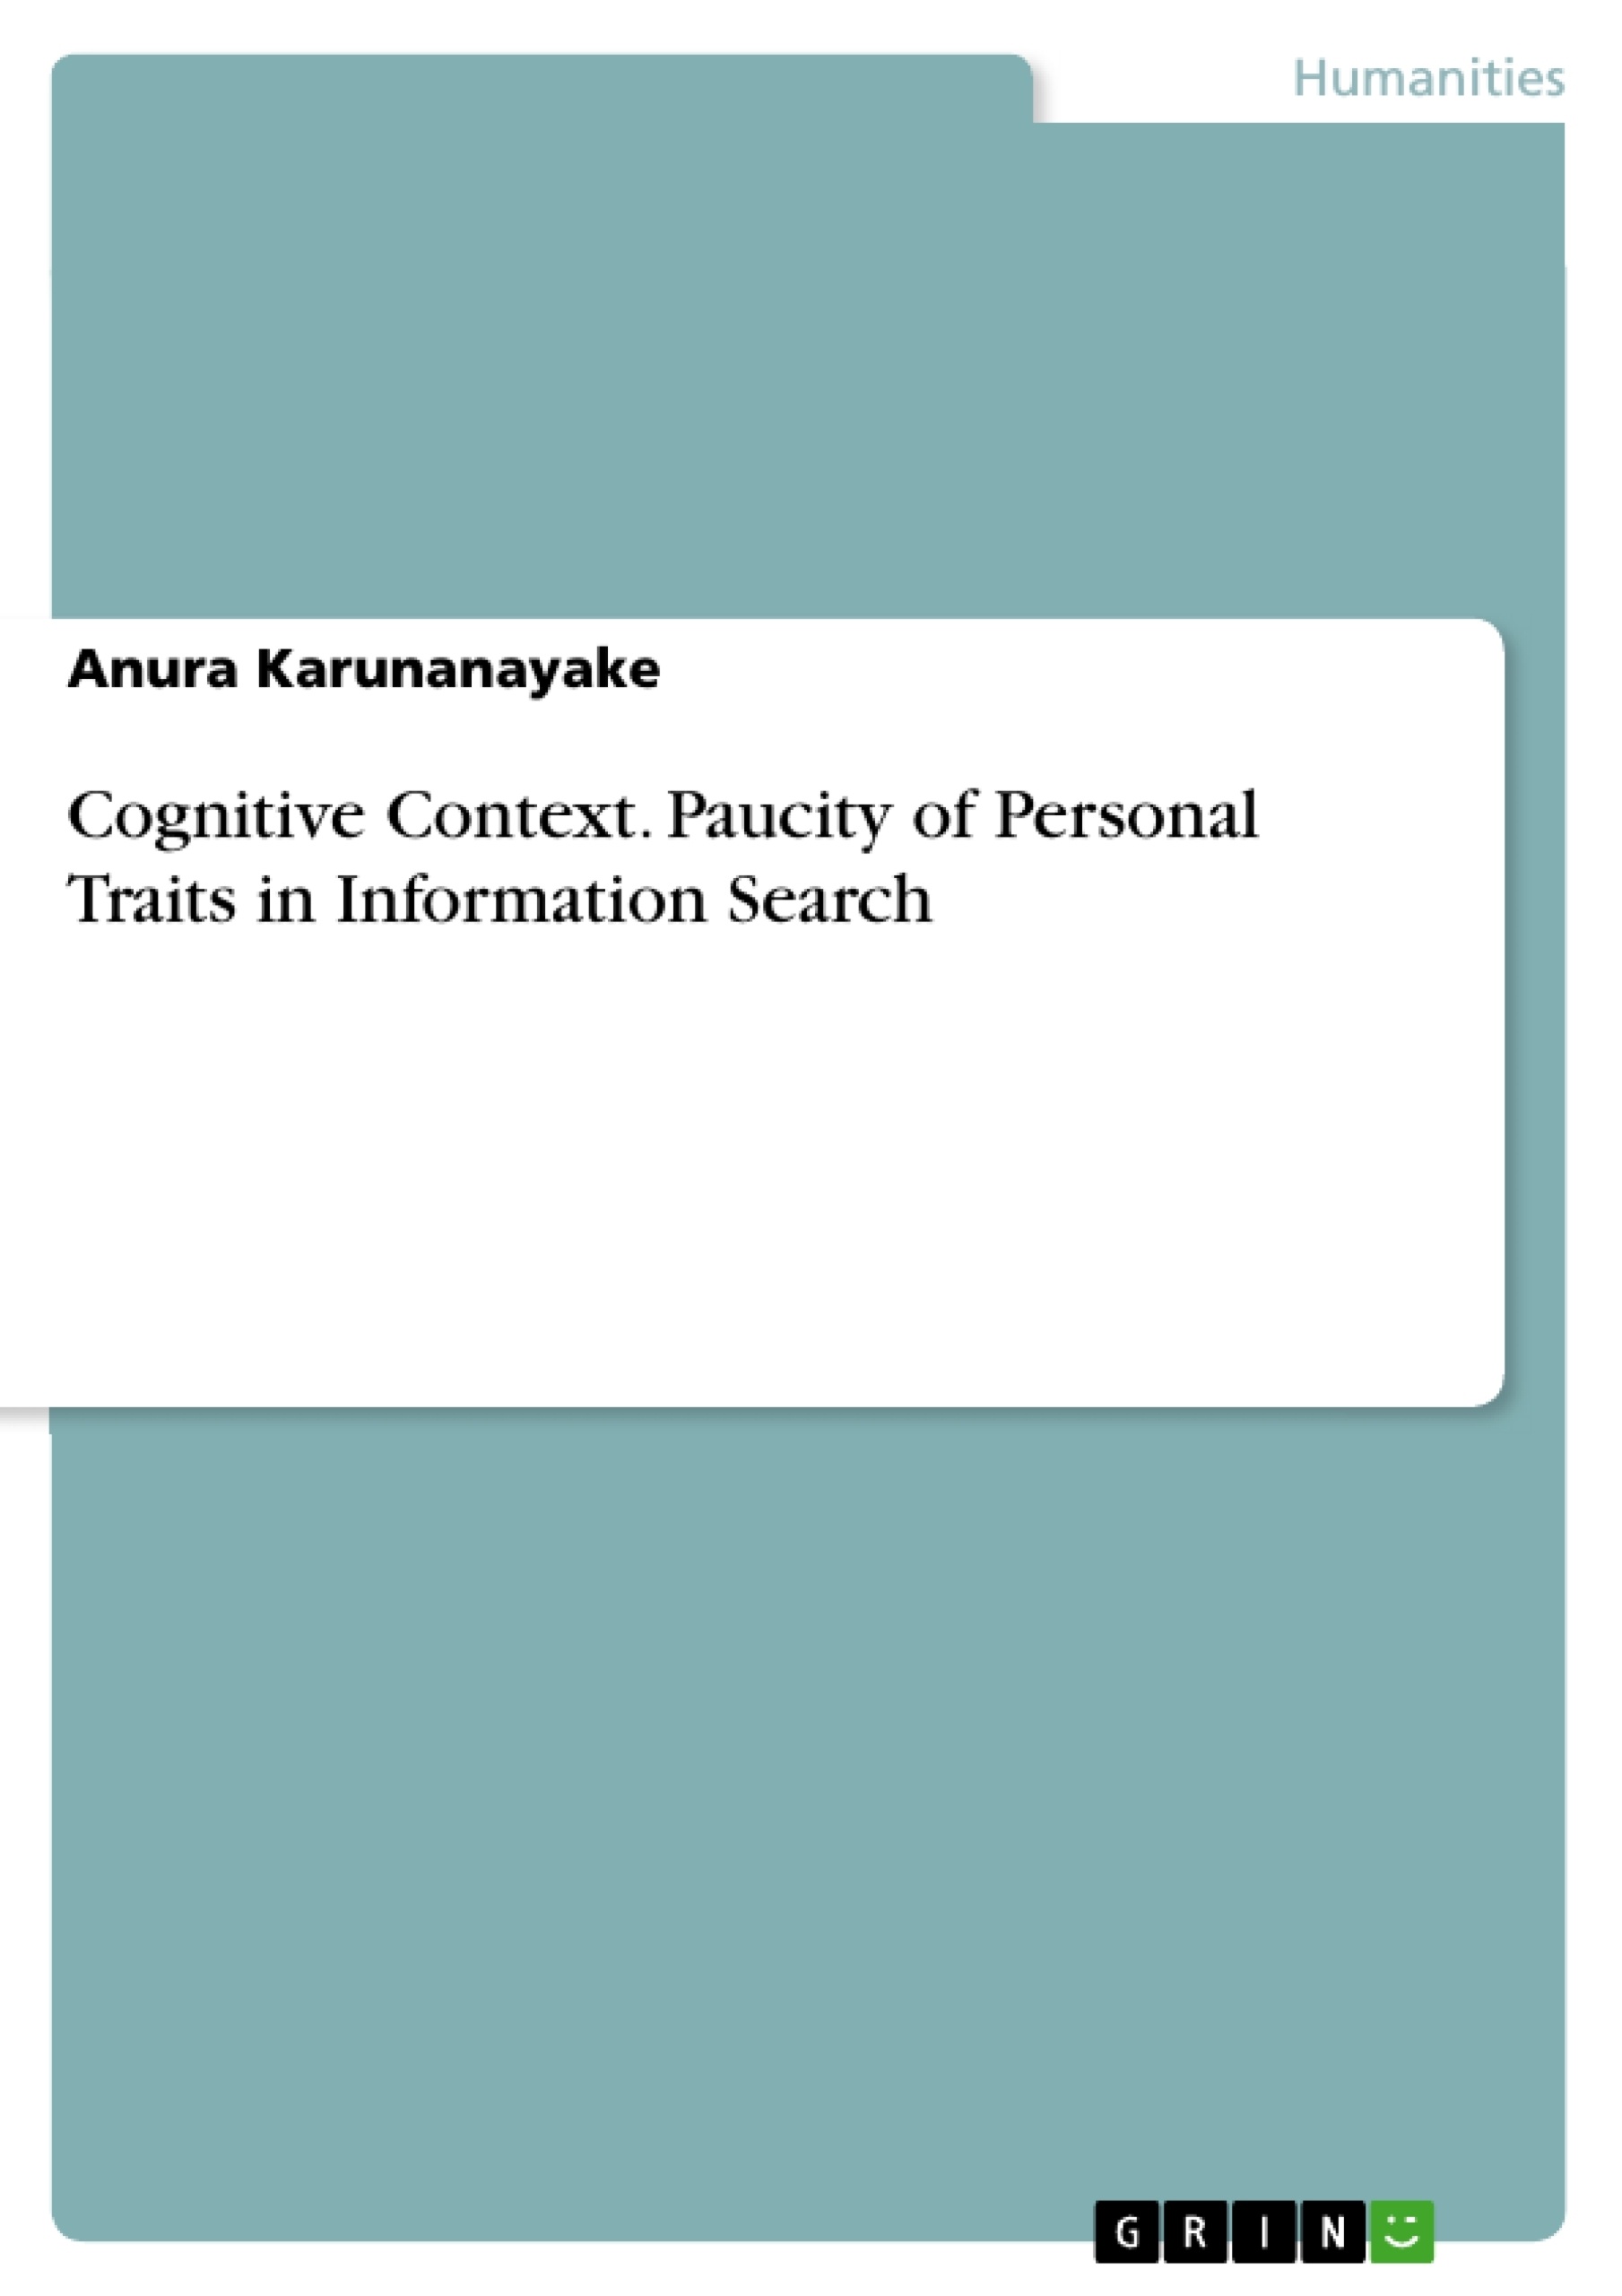 Título: Cognitive Context. Paucity of Personal Traits in Information Search